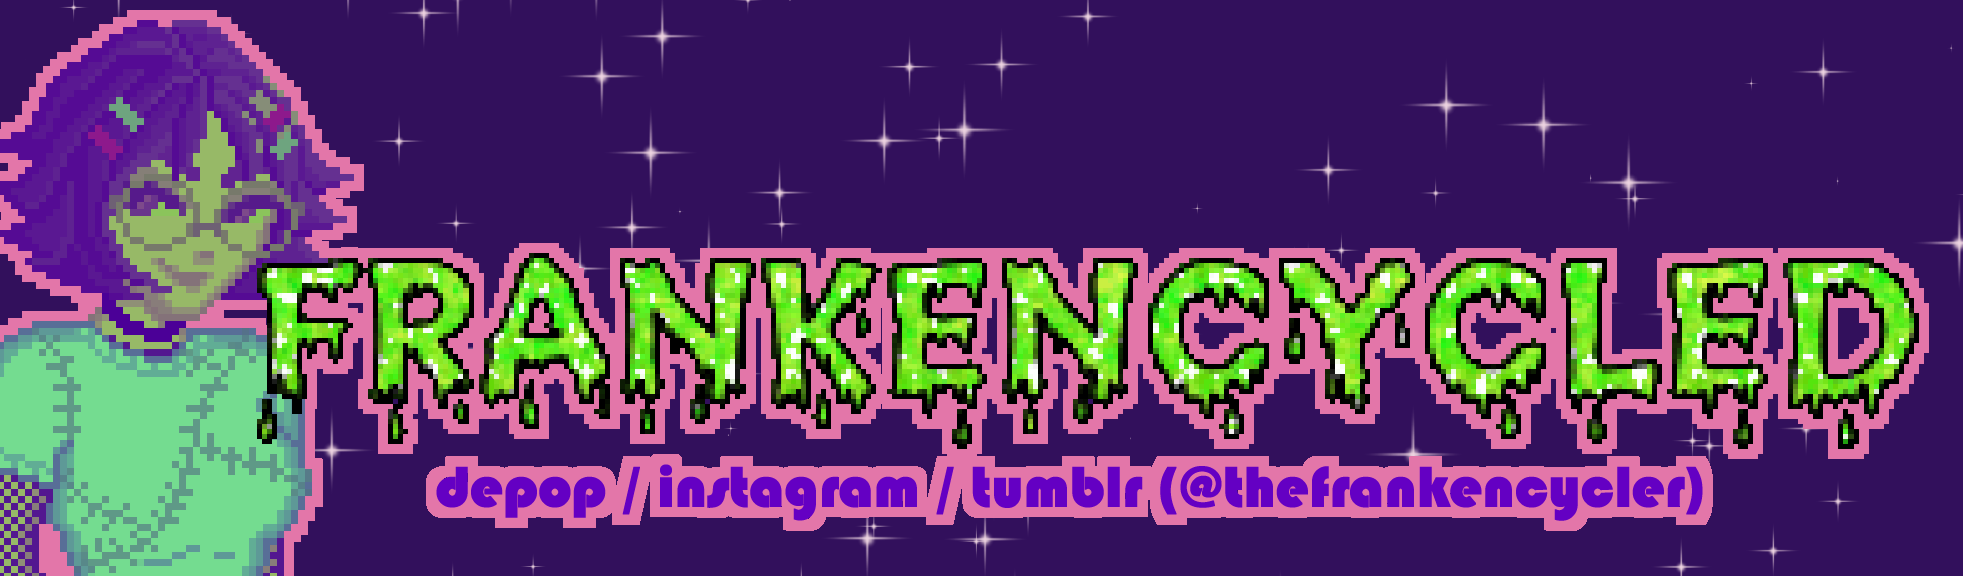 the logo for Frankencycled: 'Frankencycled' is written in large green pixelated letters that appear to be dripping slime. underneath, smaller purple text reads 'depop / instagram / tumblr (@thefrankencycler).' on the far left is a pixel doll from the waist up; it depicts the webmaster in stylized colors, mainly purple and green. they have light skin, round glasses, choppy bobbed hair, a stitched-together looking t-shirt, and they are smiling. the background of the logo is purple with scattered sparkles.